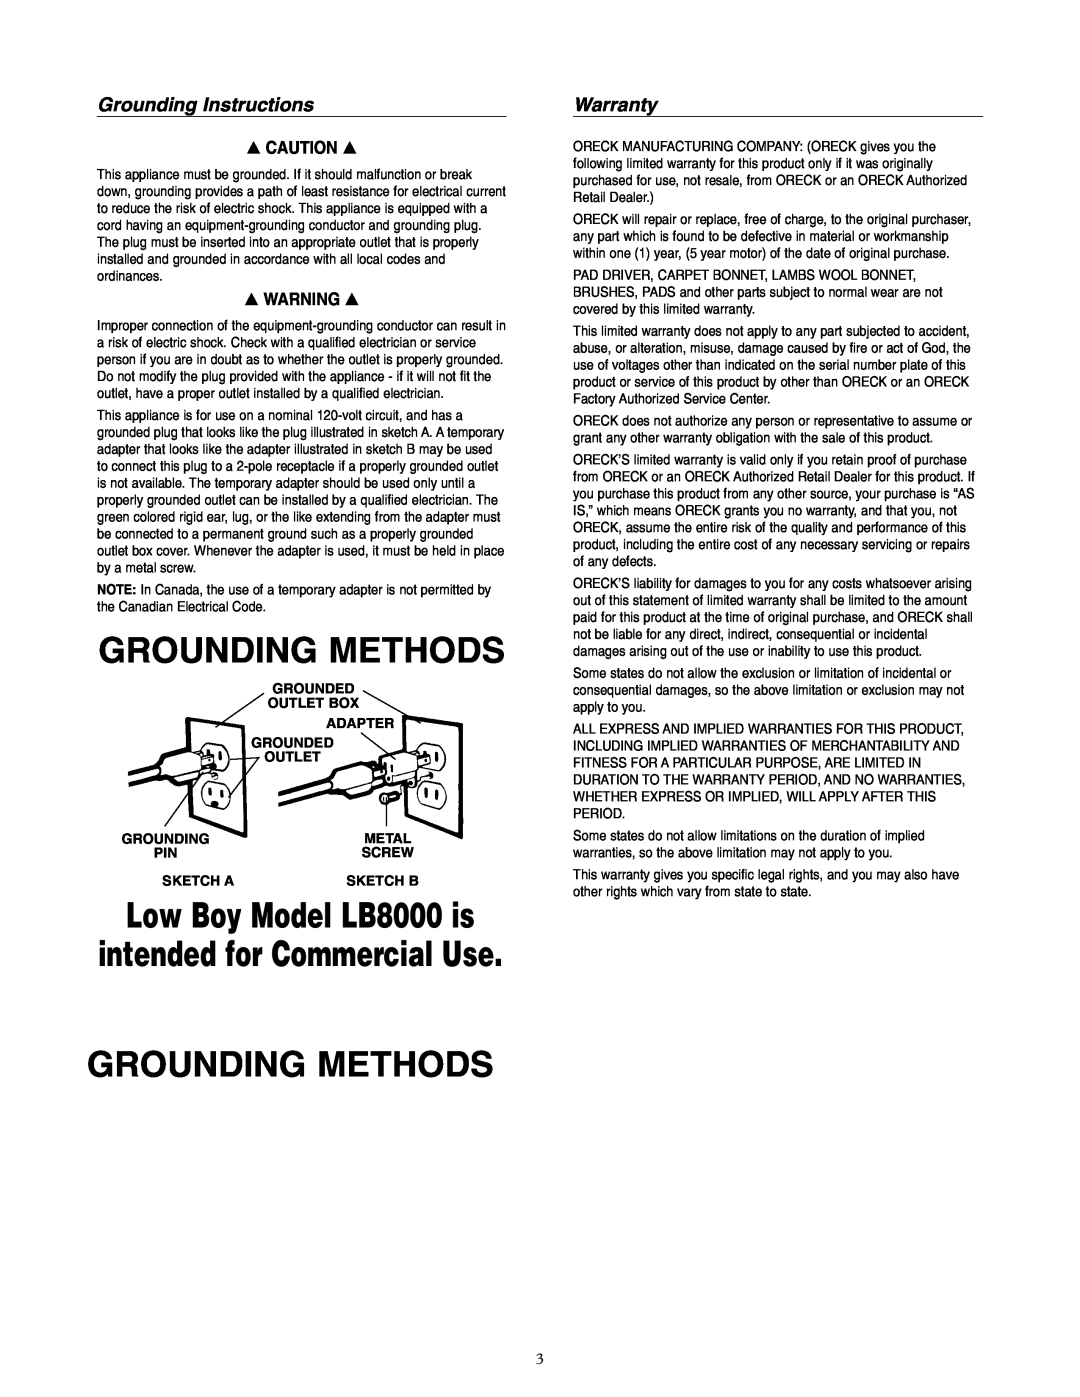 Oreck Grounding Instructions, Warranty, Grounding Methods, Low Boy Model LB8000 is, intended for Commercial Use, Metal 